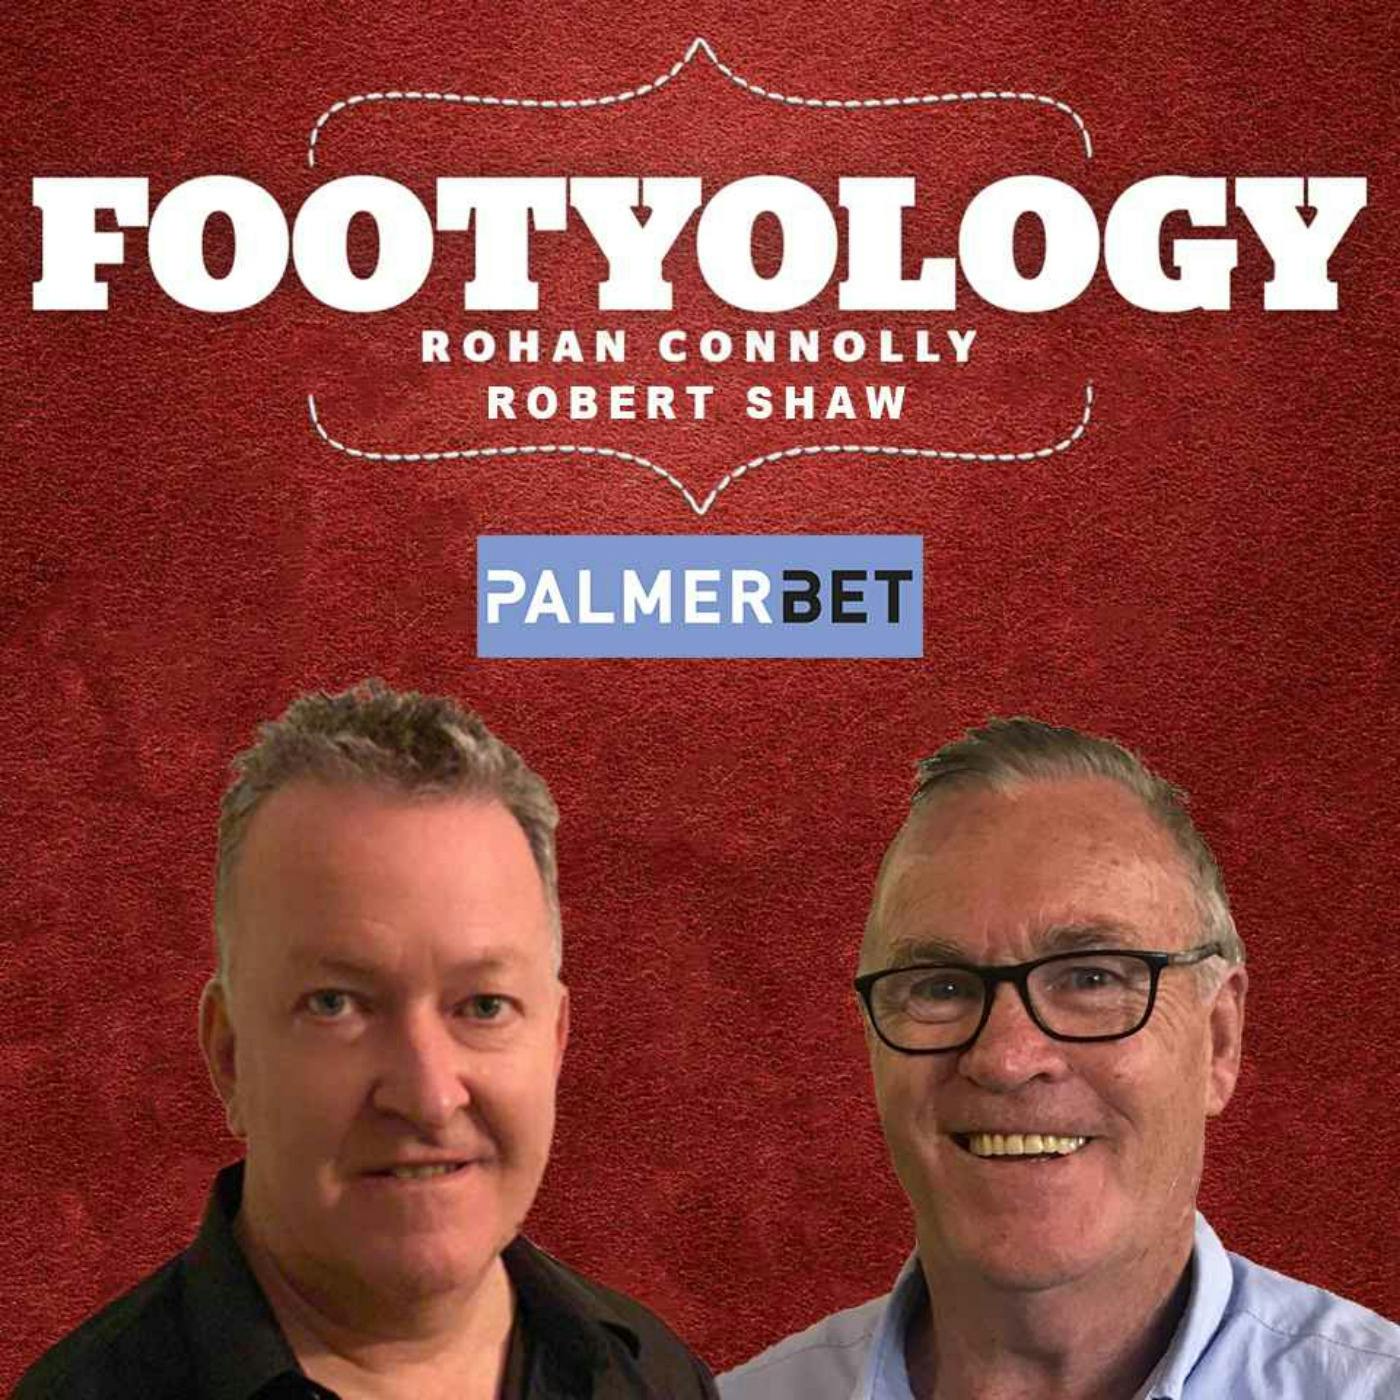 Footyology Podcast - May 22nd 2022